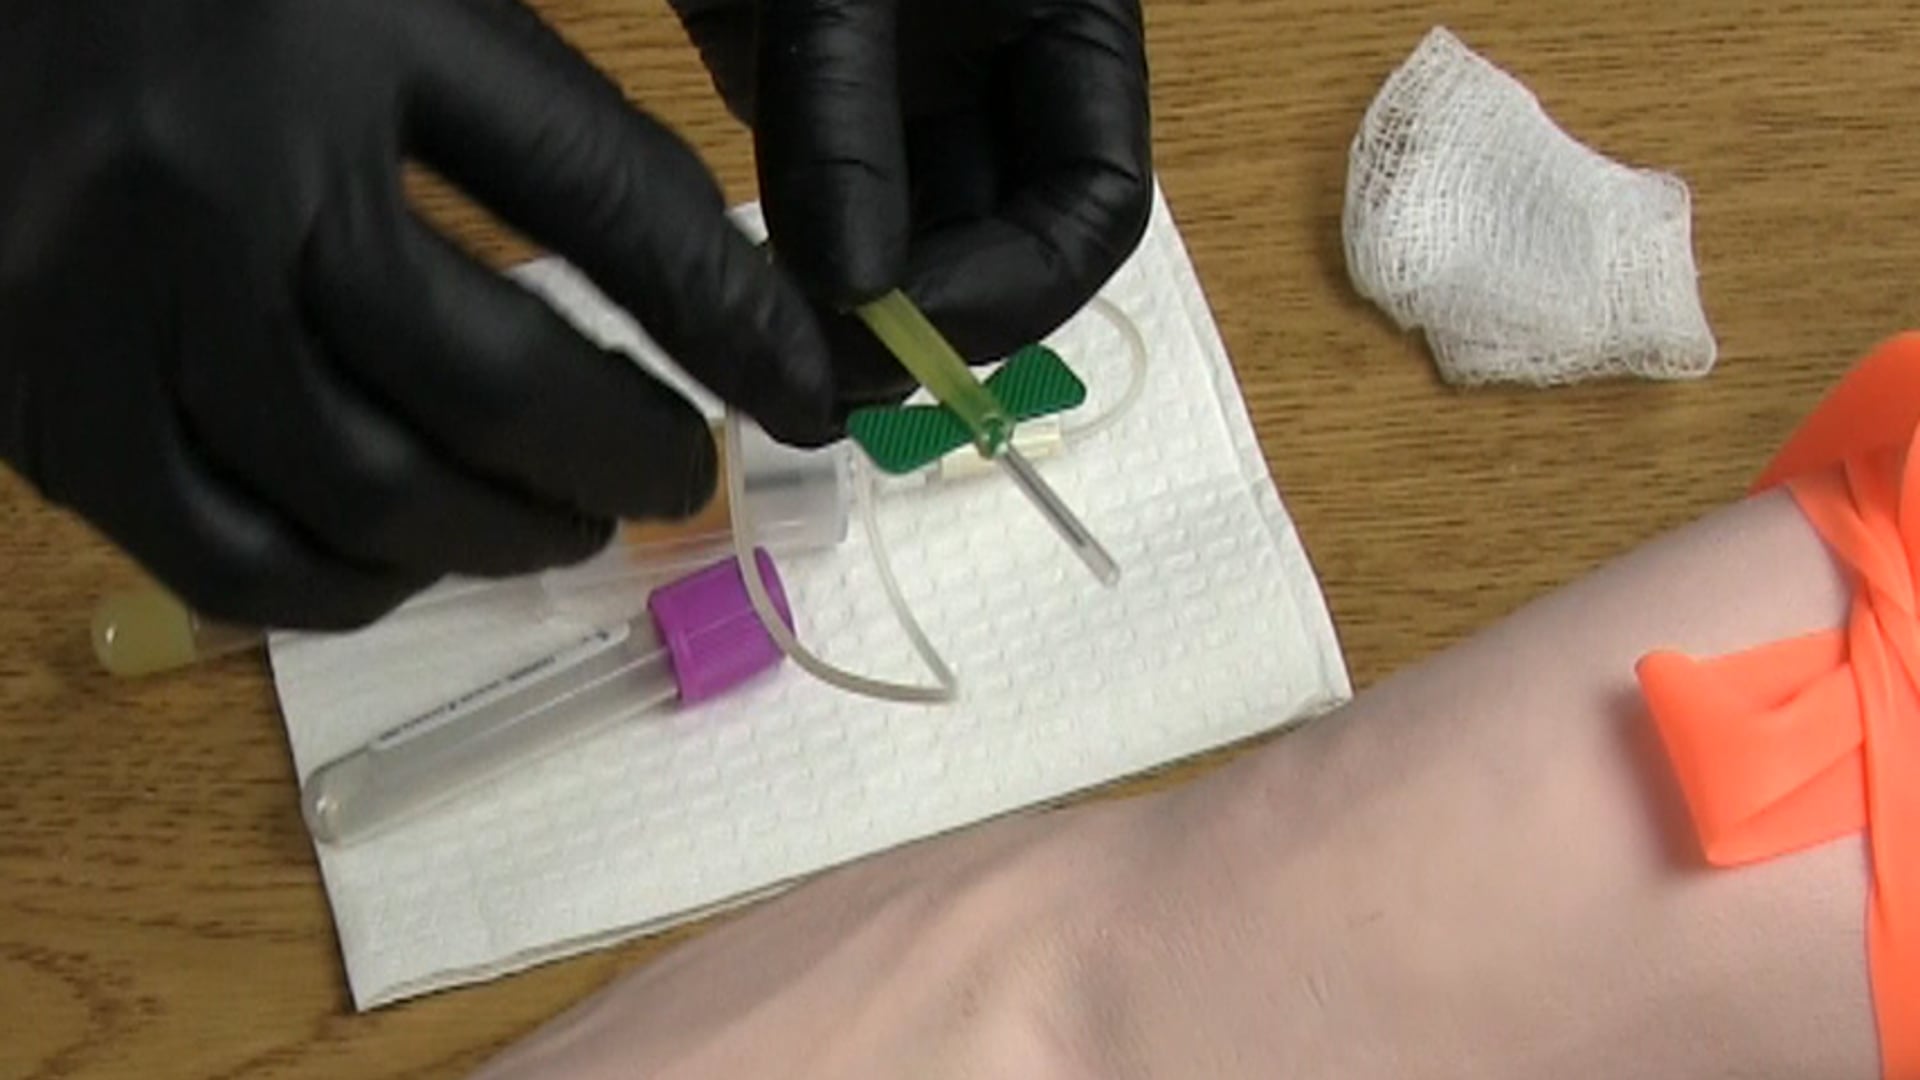 Sample Clips from FRCC Phlebotomy Videos